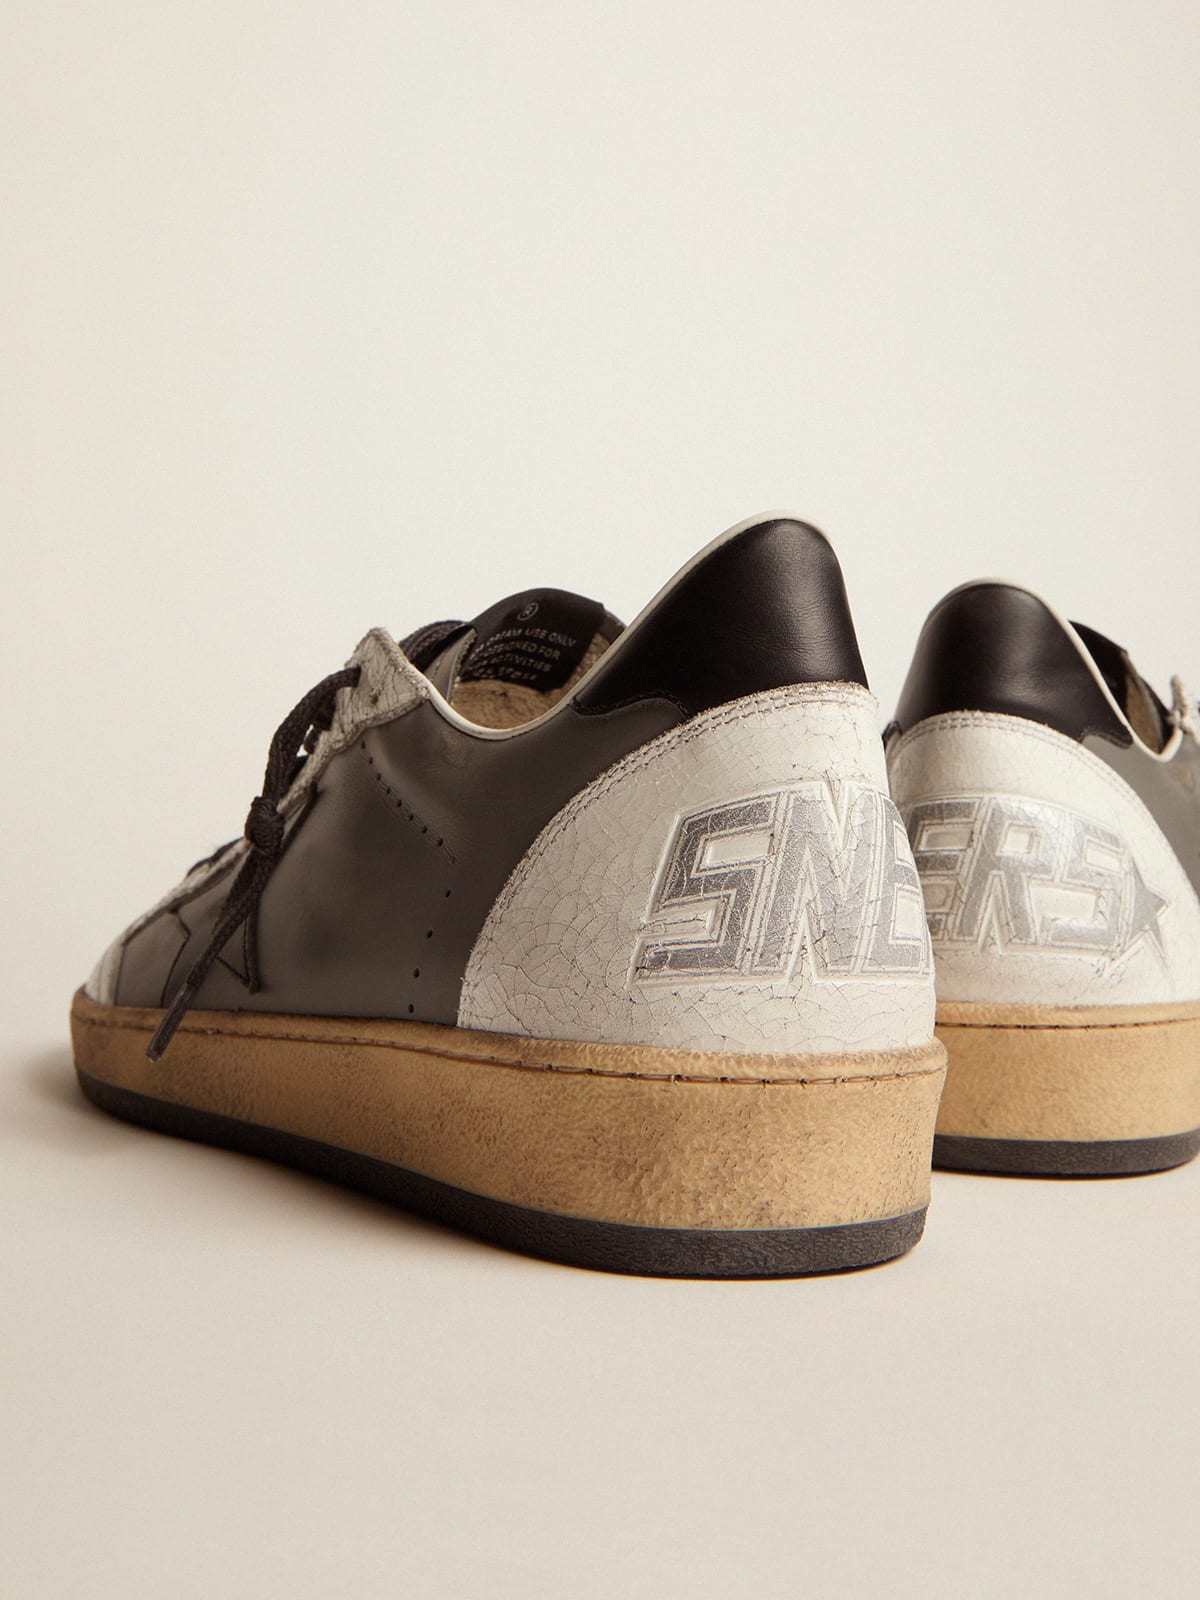 Golden Goose - Men's Ball Star in gray leather with black star and heel tab in 